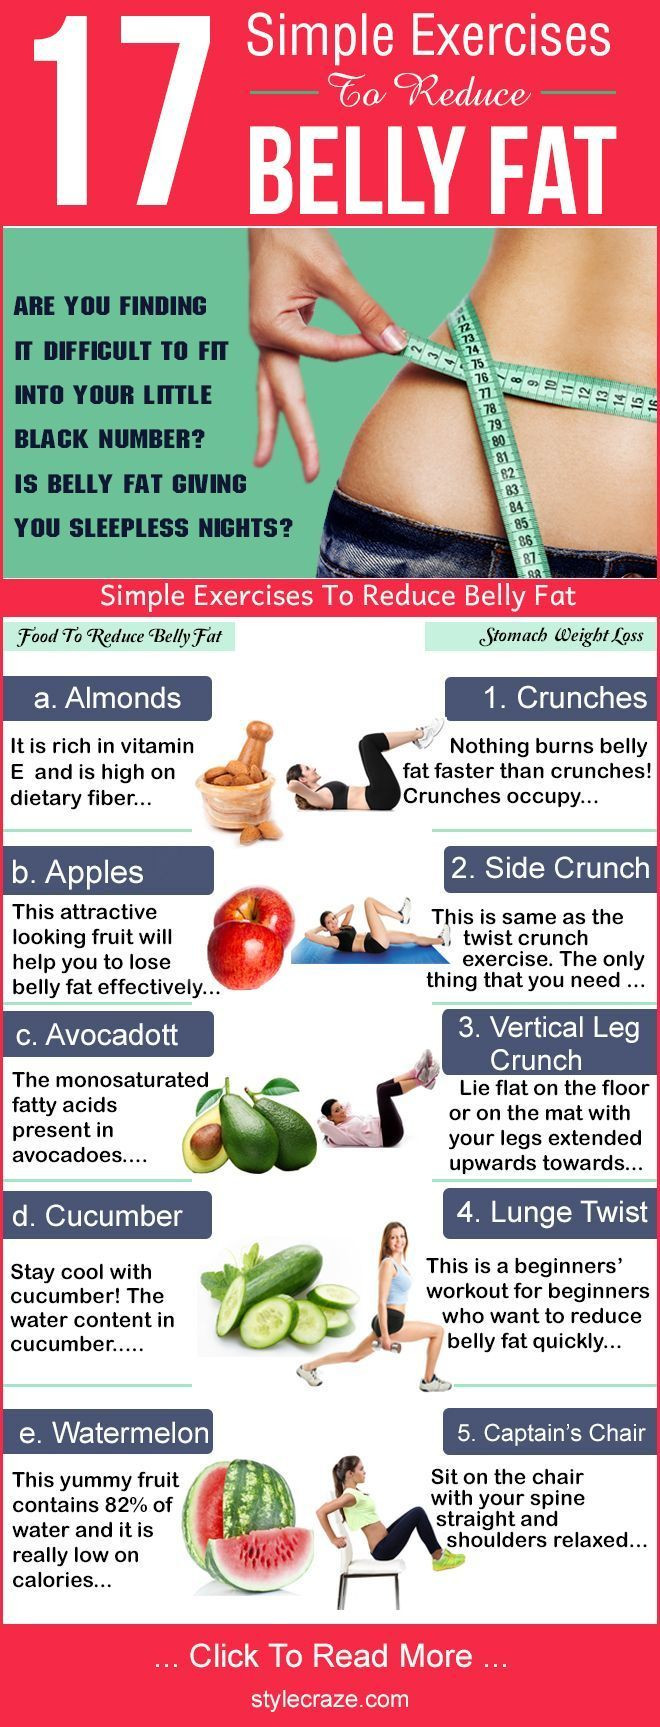 How To Lose Belly Fat Fast Workouts
 Pin on fitness